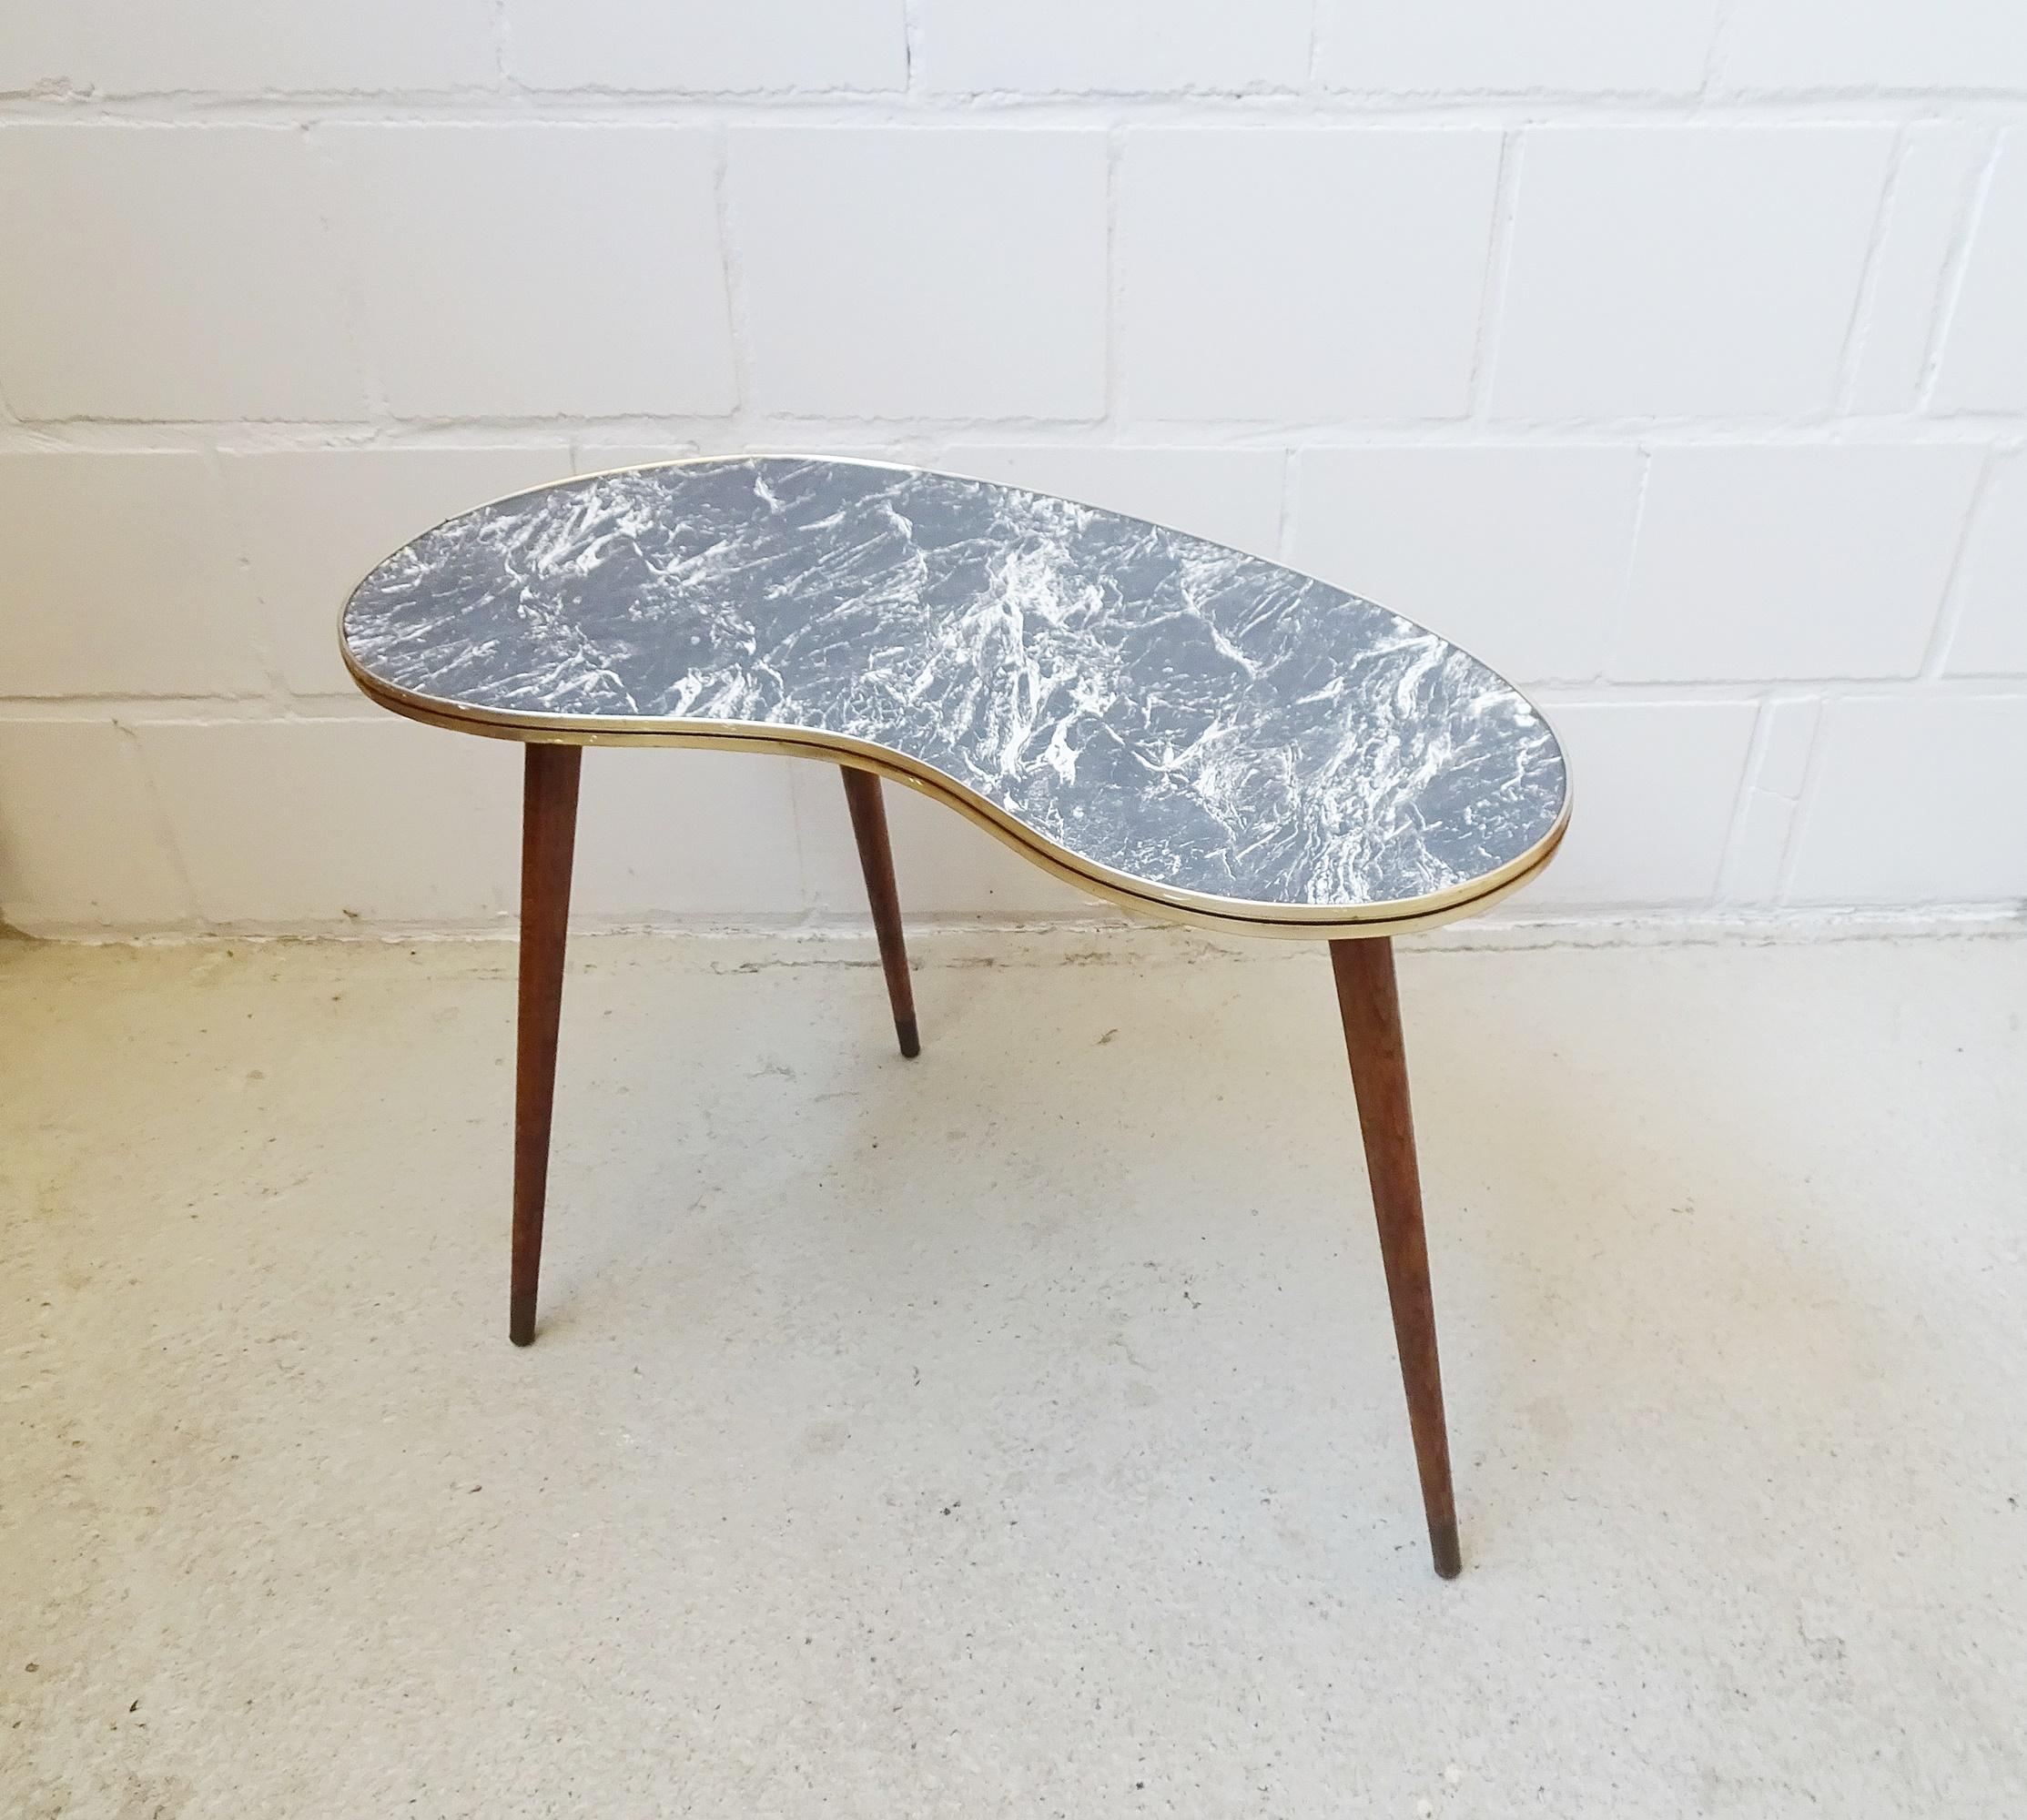 Vintage kidney-shaped table with a Formica table top in black and white marble look and three removable legs. The medium-sized table is the ideal height to be used as a coffee or side table. The timeless marbling and the slightly flared solid wood